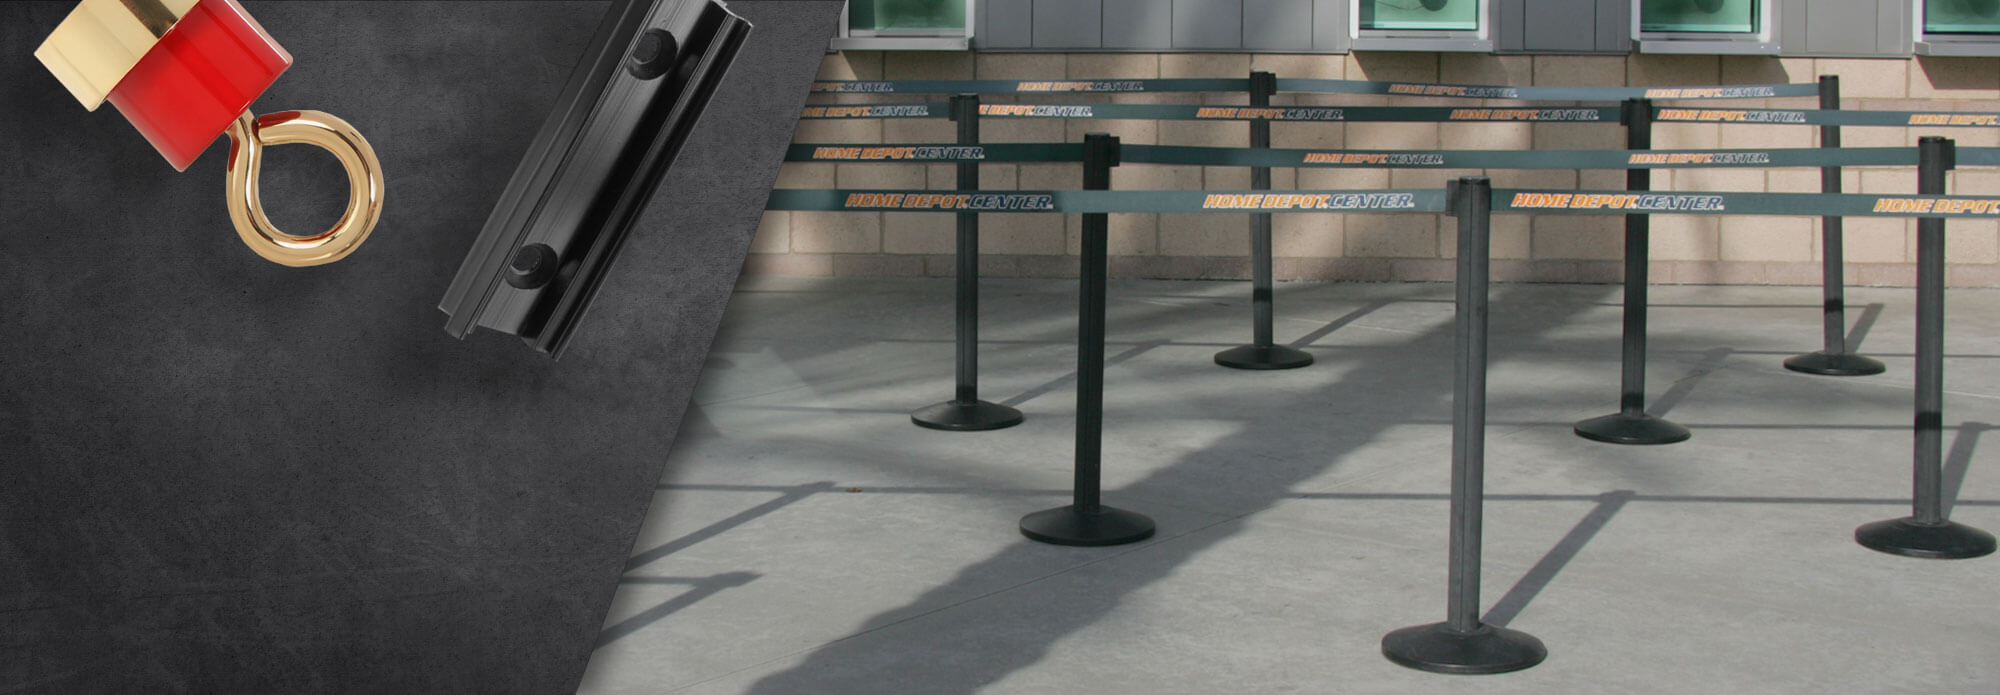 Stanchion Safety Accessories